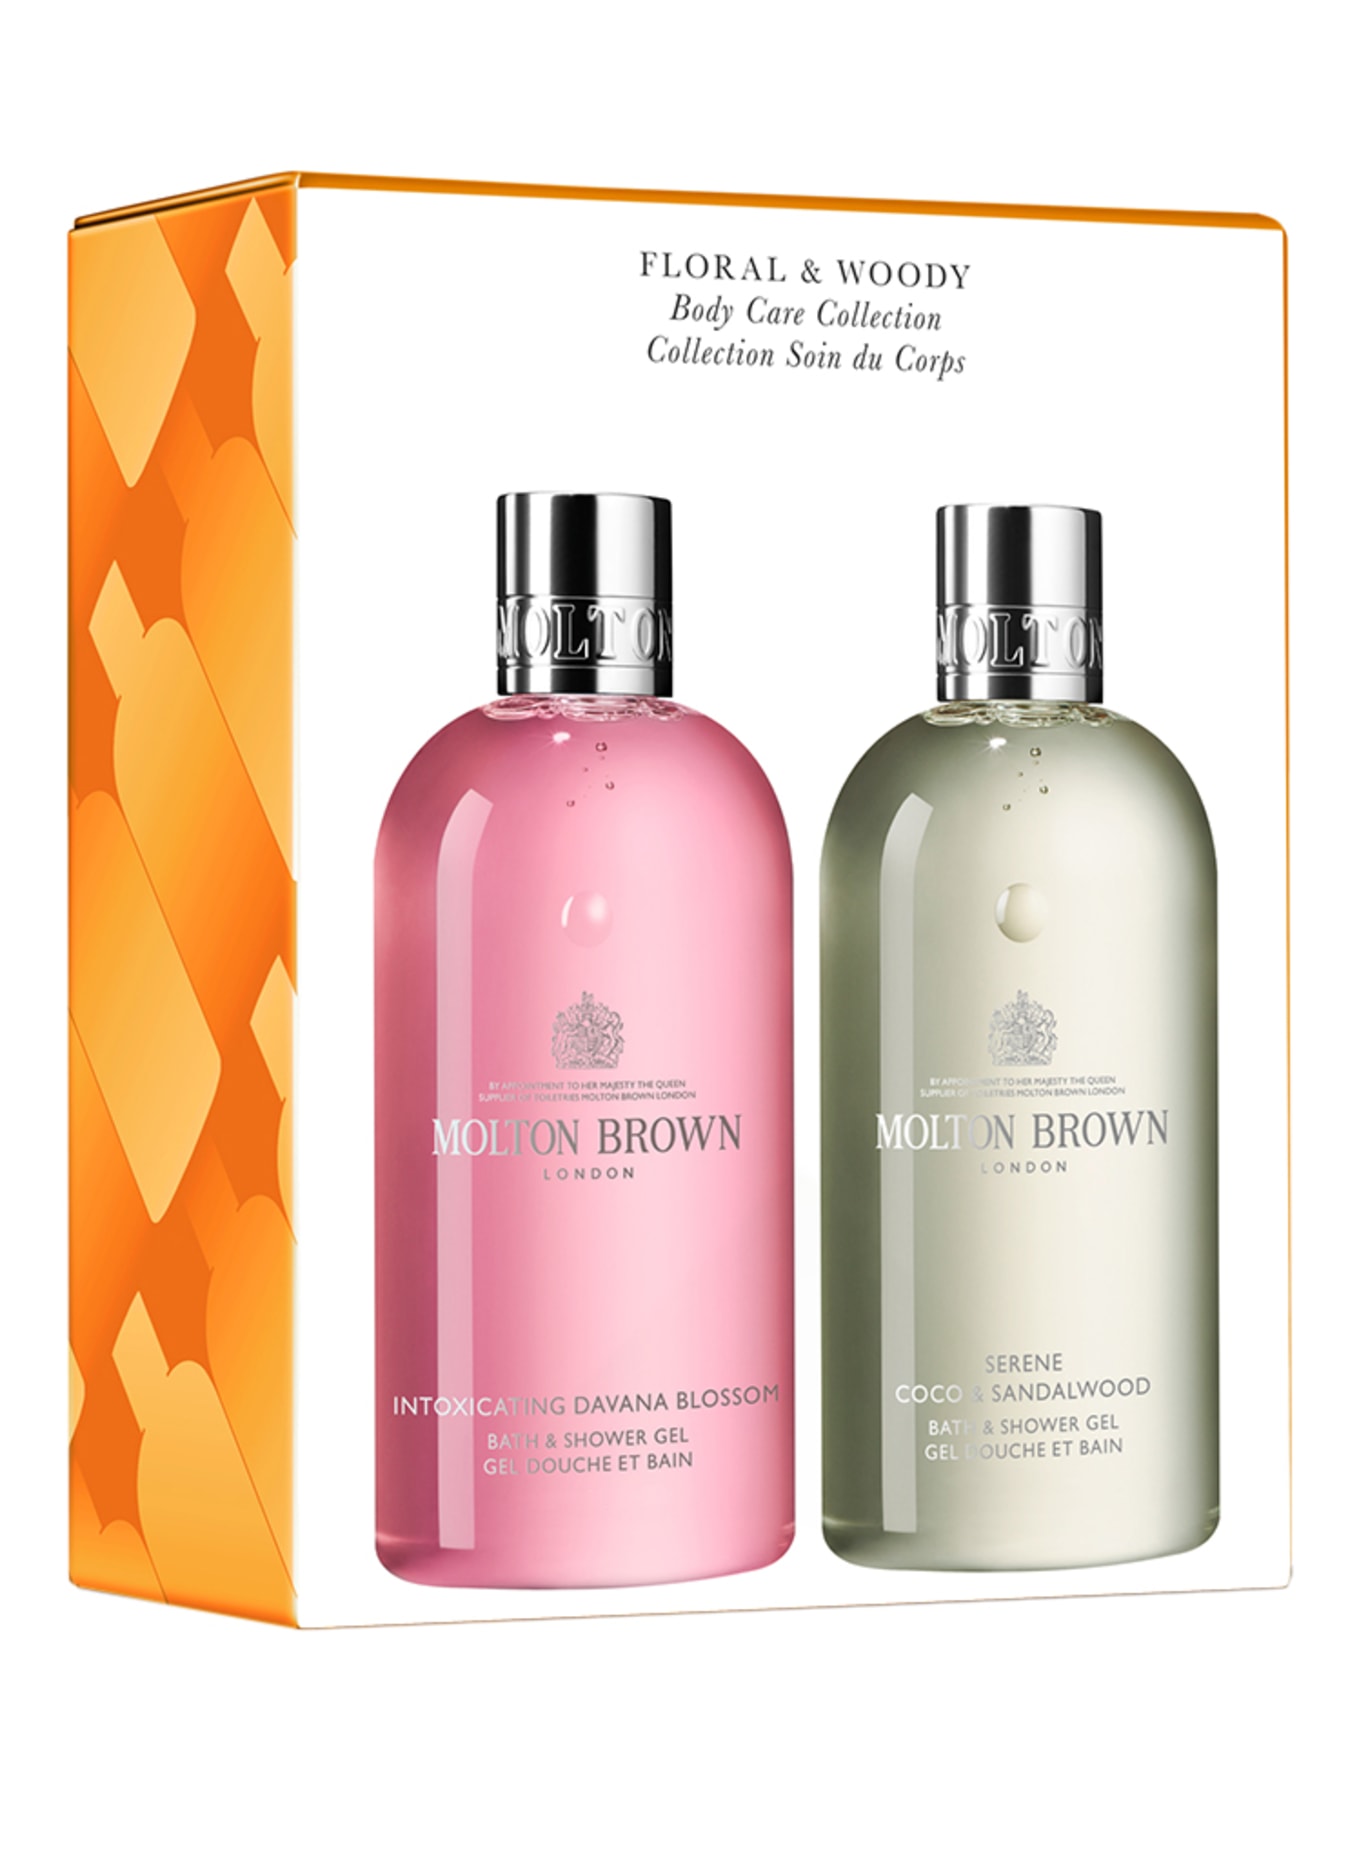 MOLTON BROWN FLORAL & WOODY BODY CARE COLLECTION (Obrázek 1)